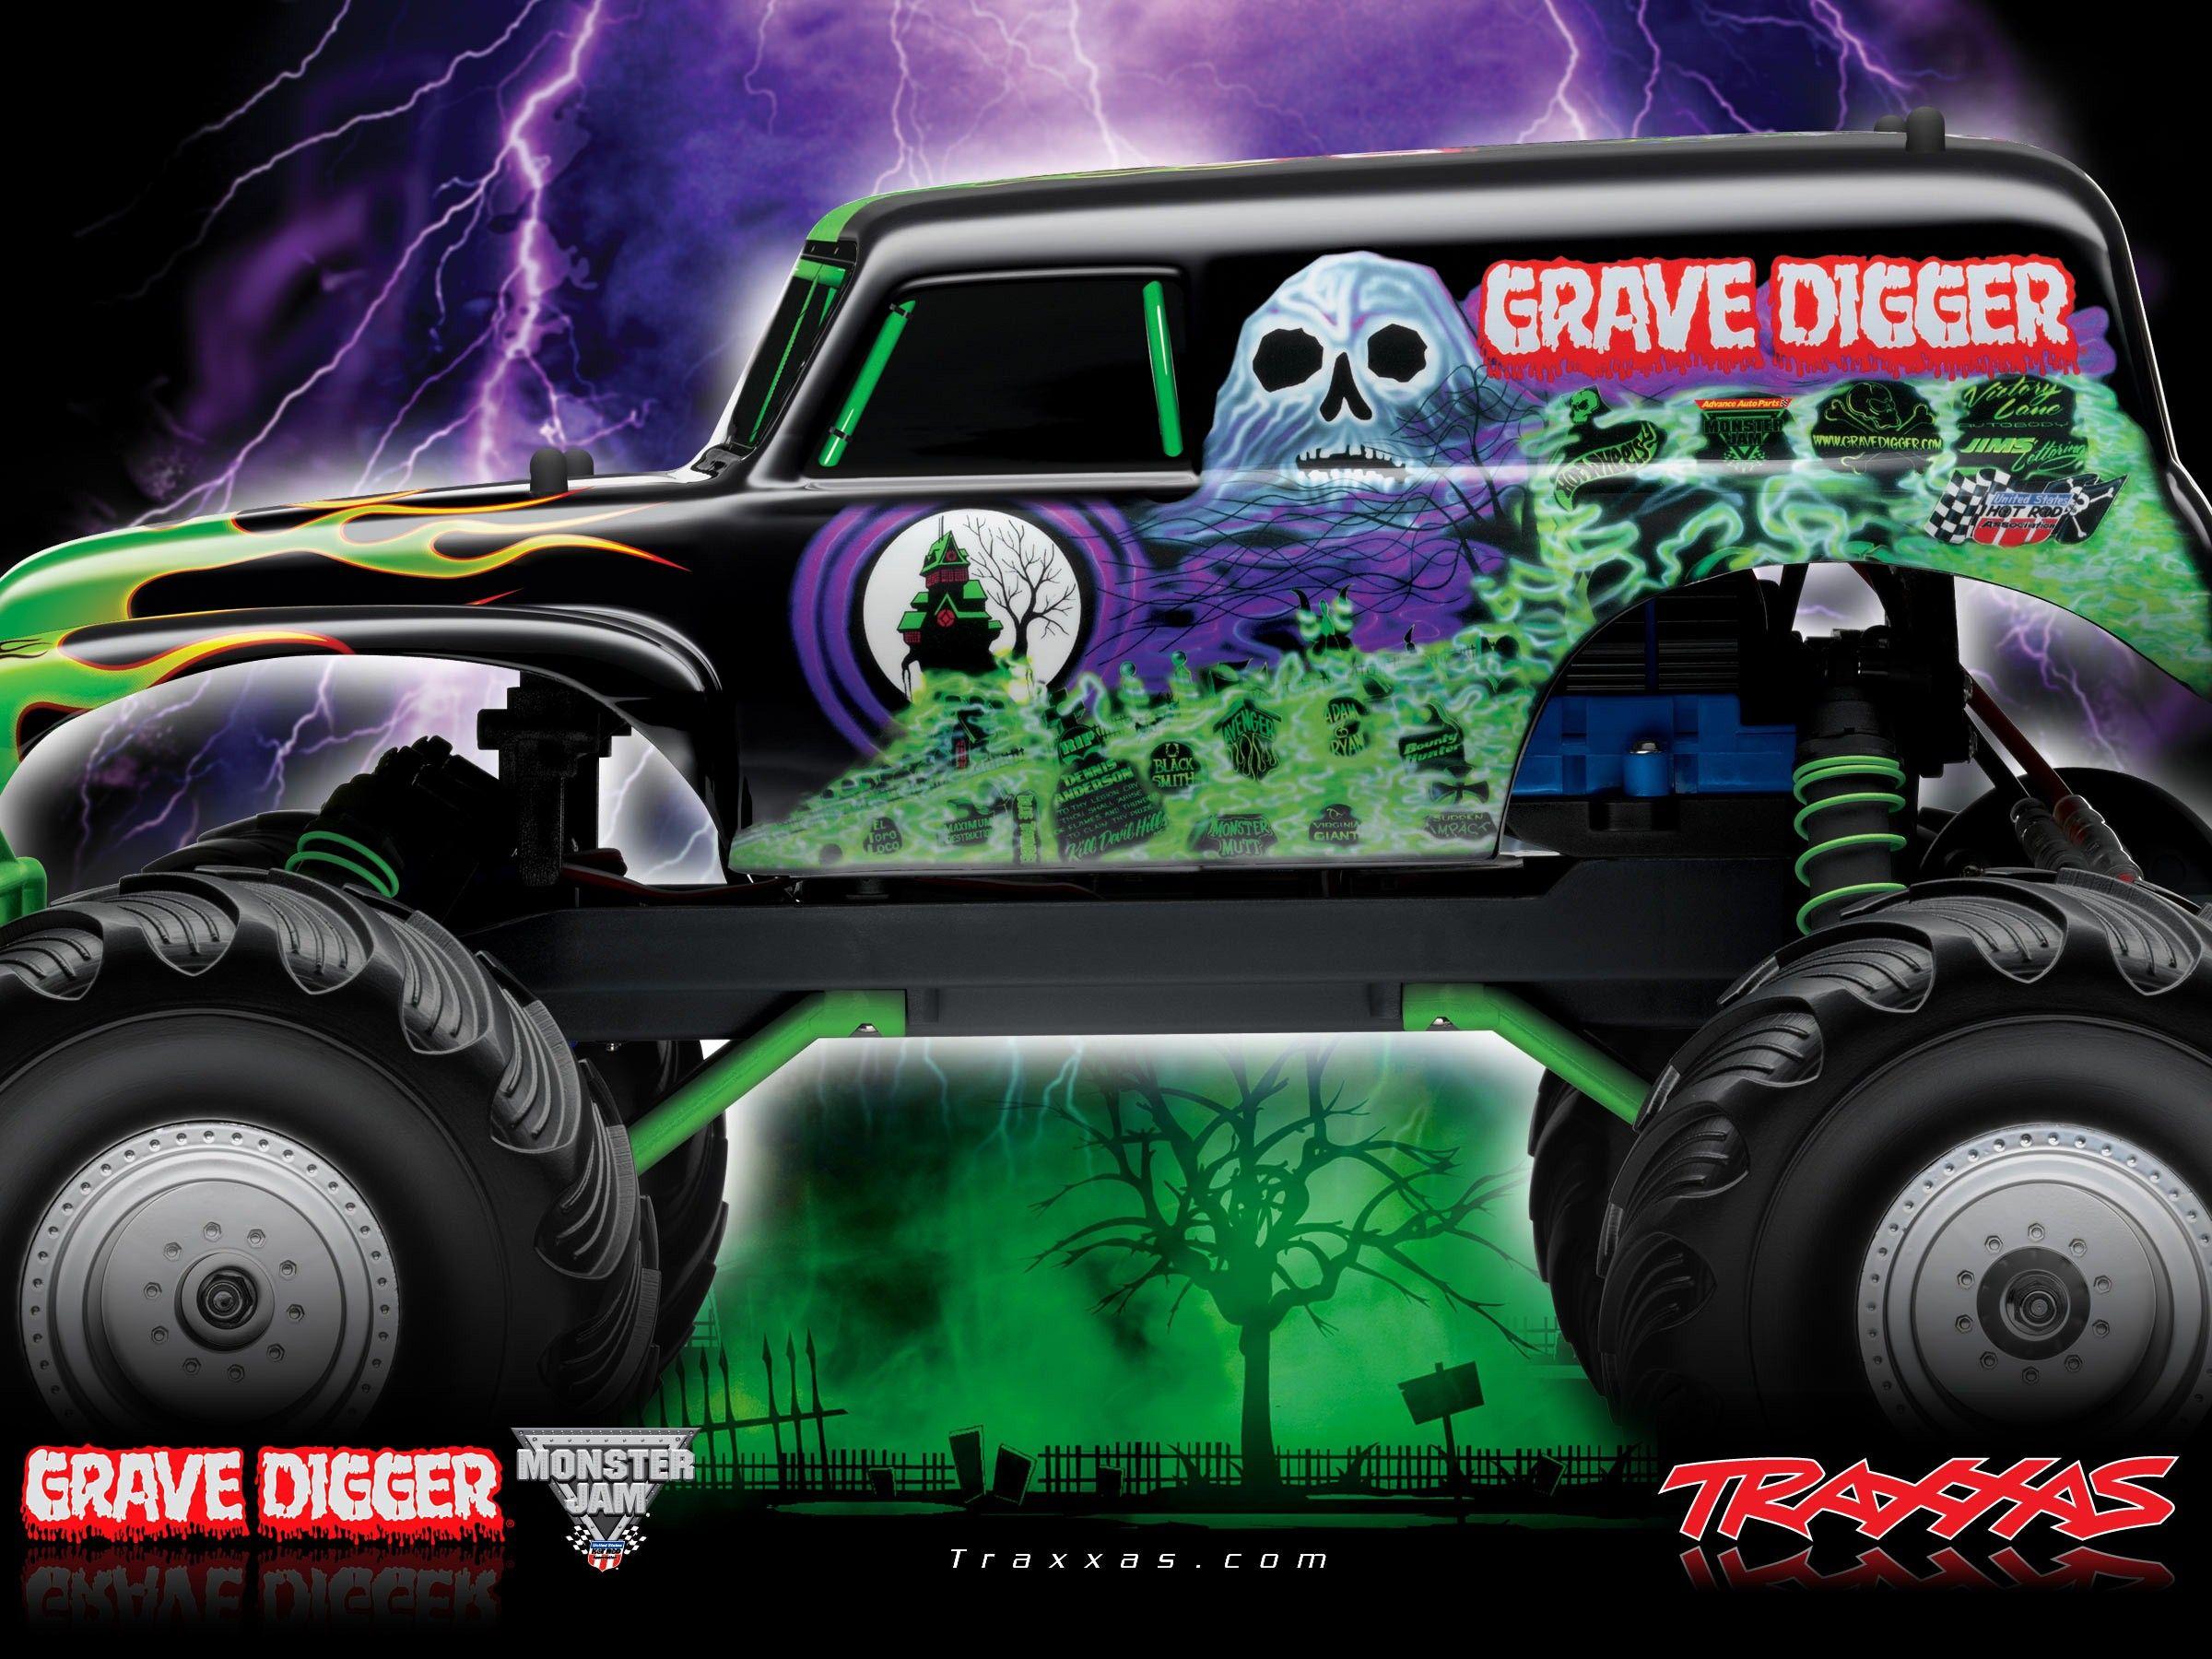 Drawn truck grave digger monster truck and in color drawn